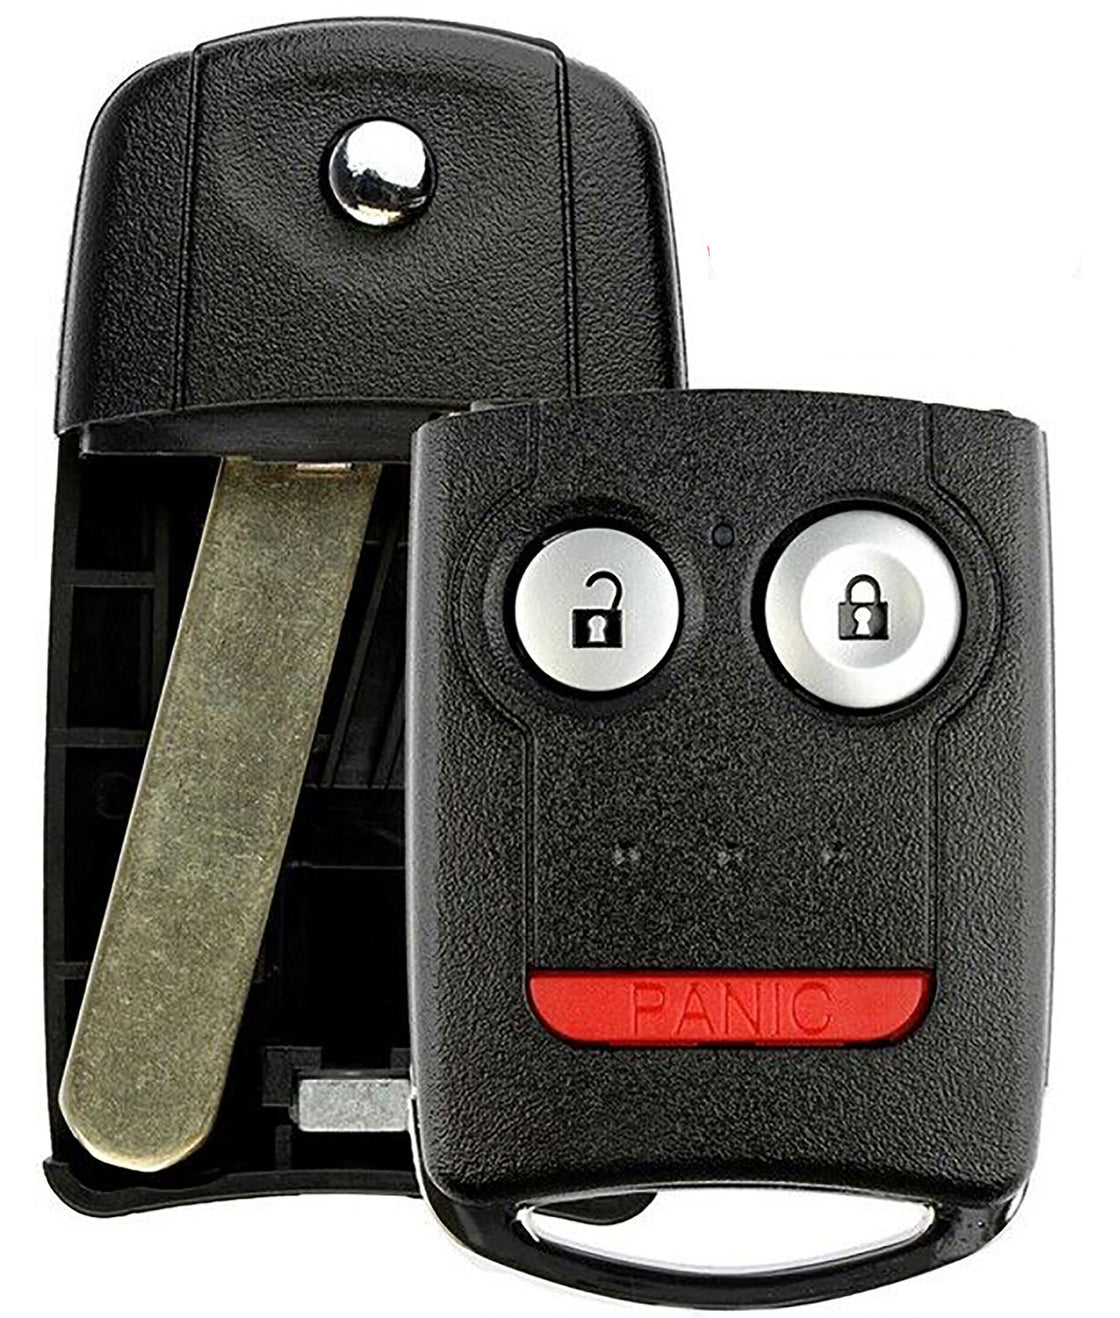 1x New Replacement Key Fob Remote SHELL / CASE Compatible with & Fit For Acura Vehicles - MPN N5F0602A1A-06 (NO electronics or Chip inside)